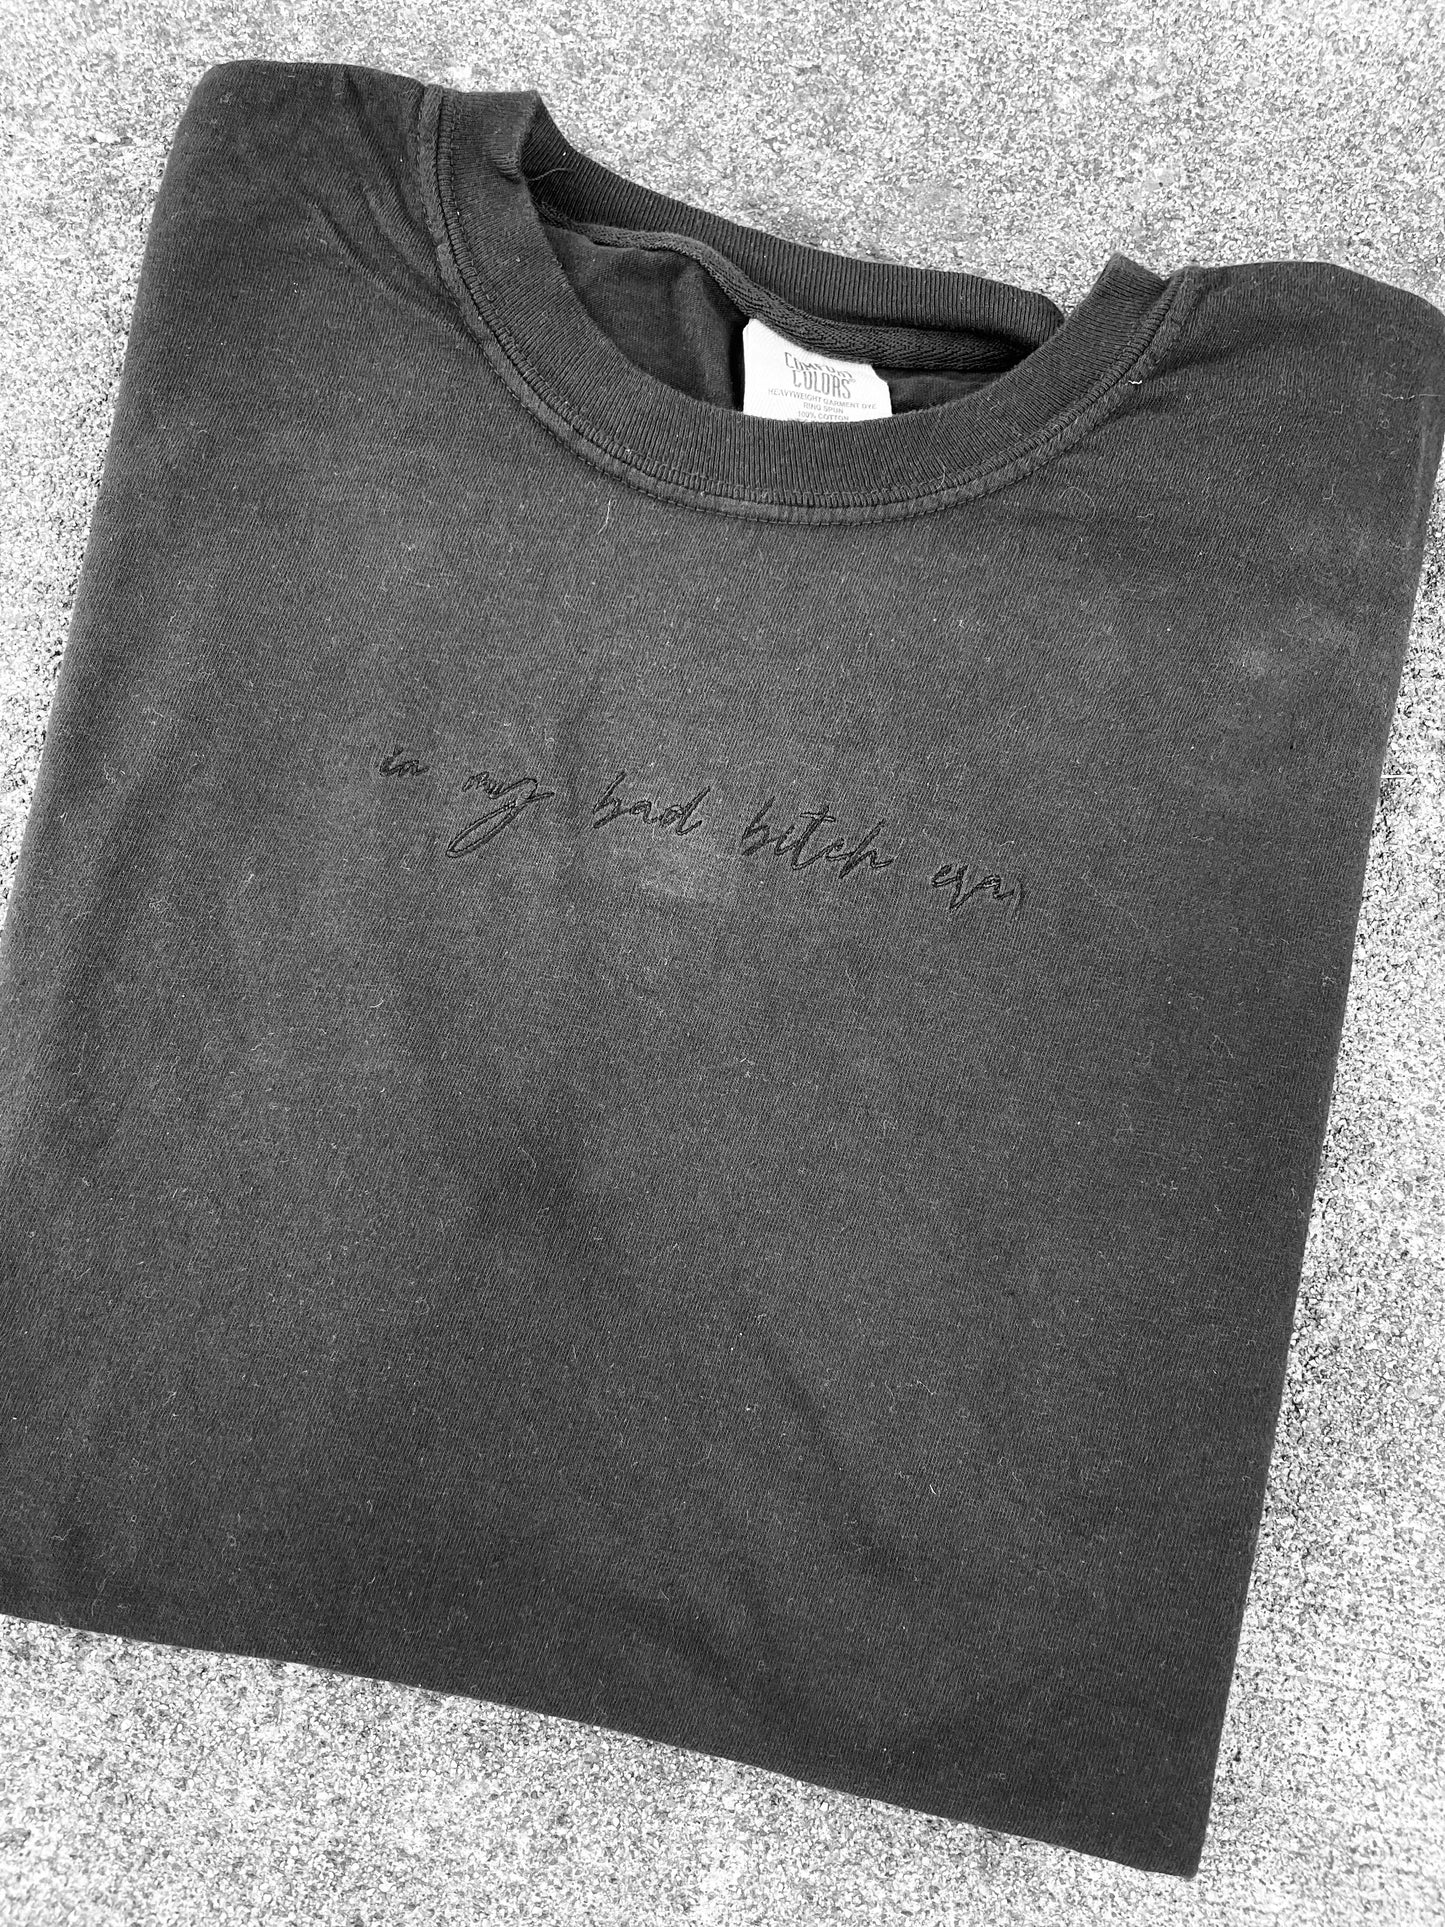 in my bad bitch era script black on black monochromatic Comfort Color embroidered tee